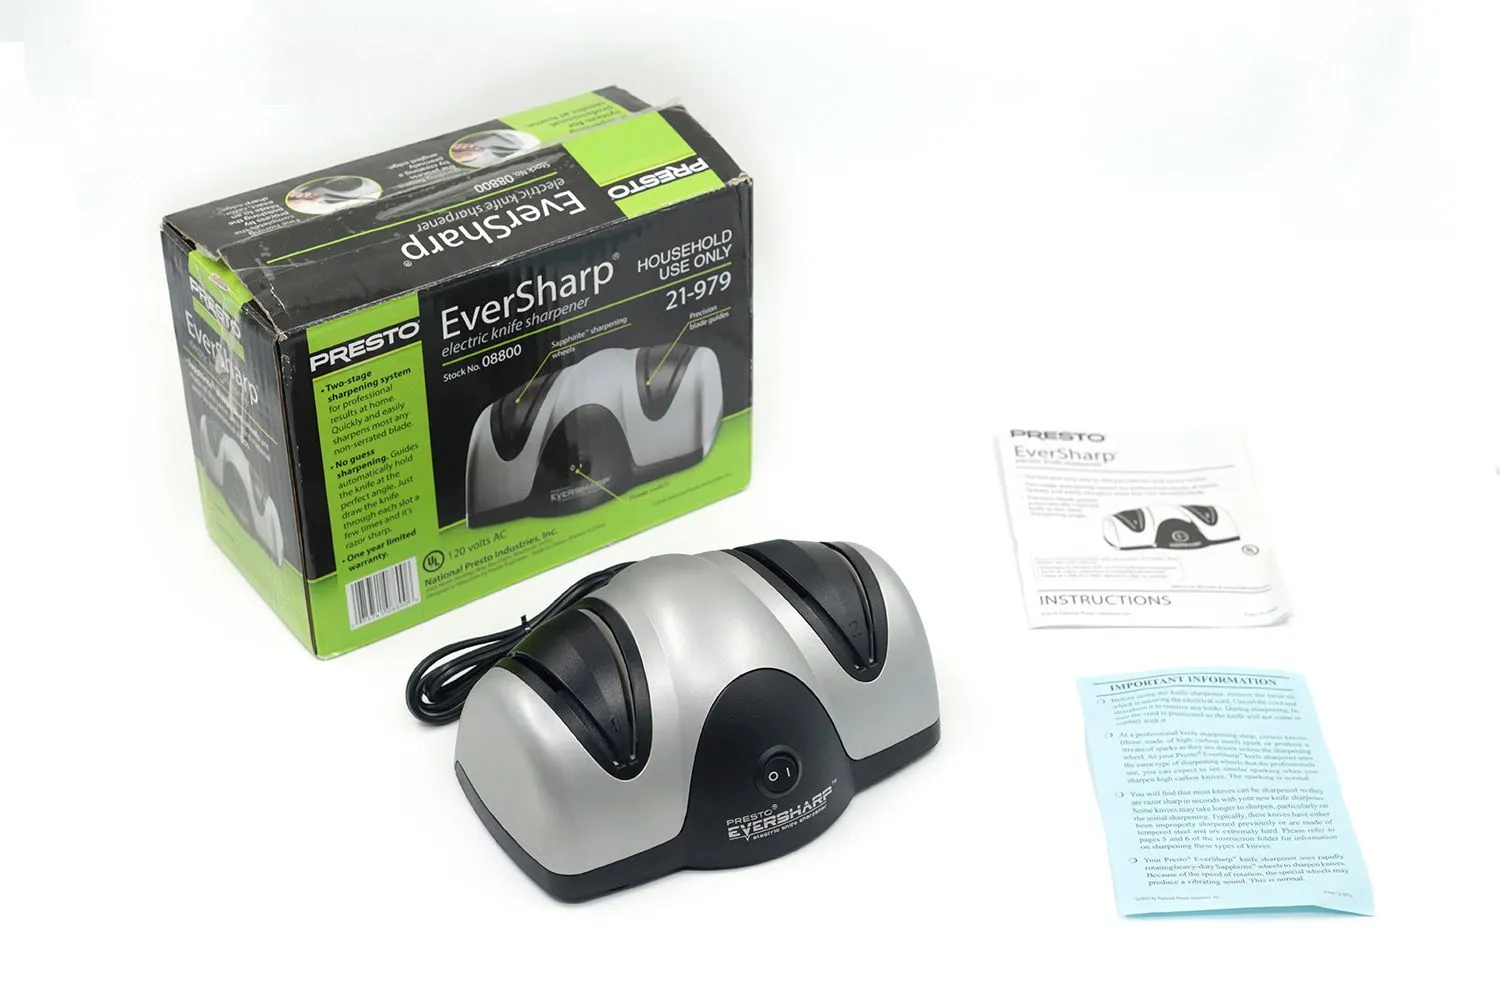 Presto EverSharp Electric Knife Sharpener Product Review 